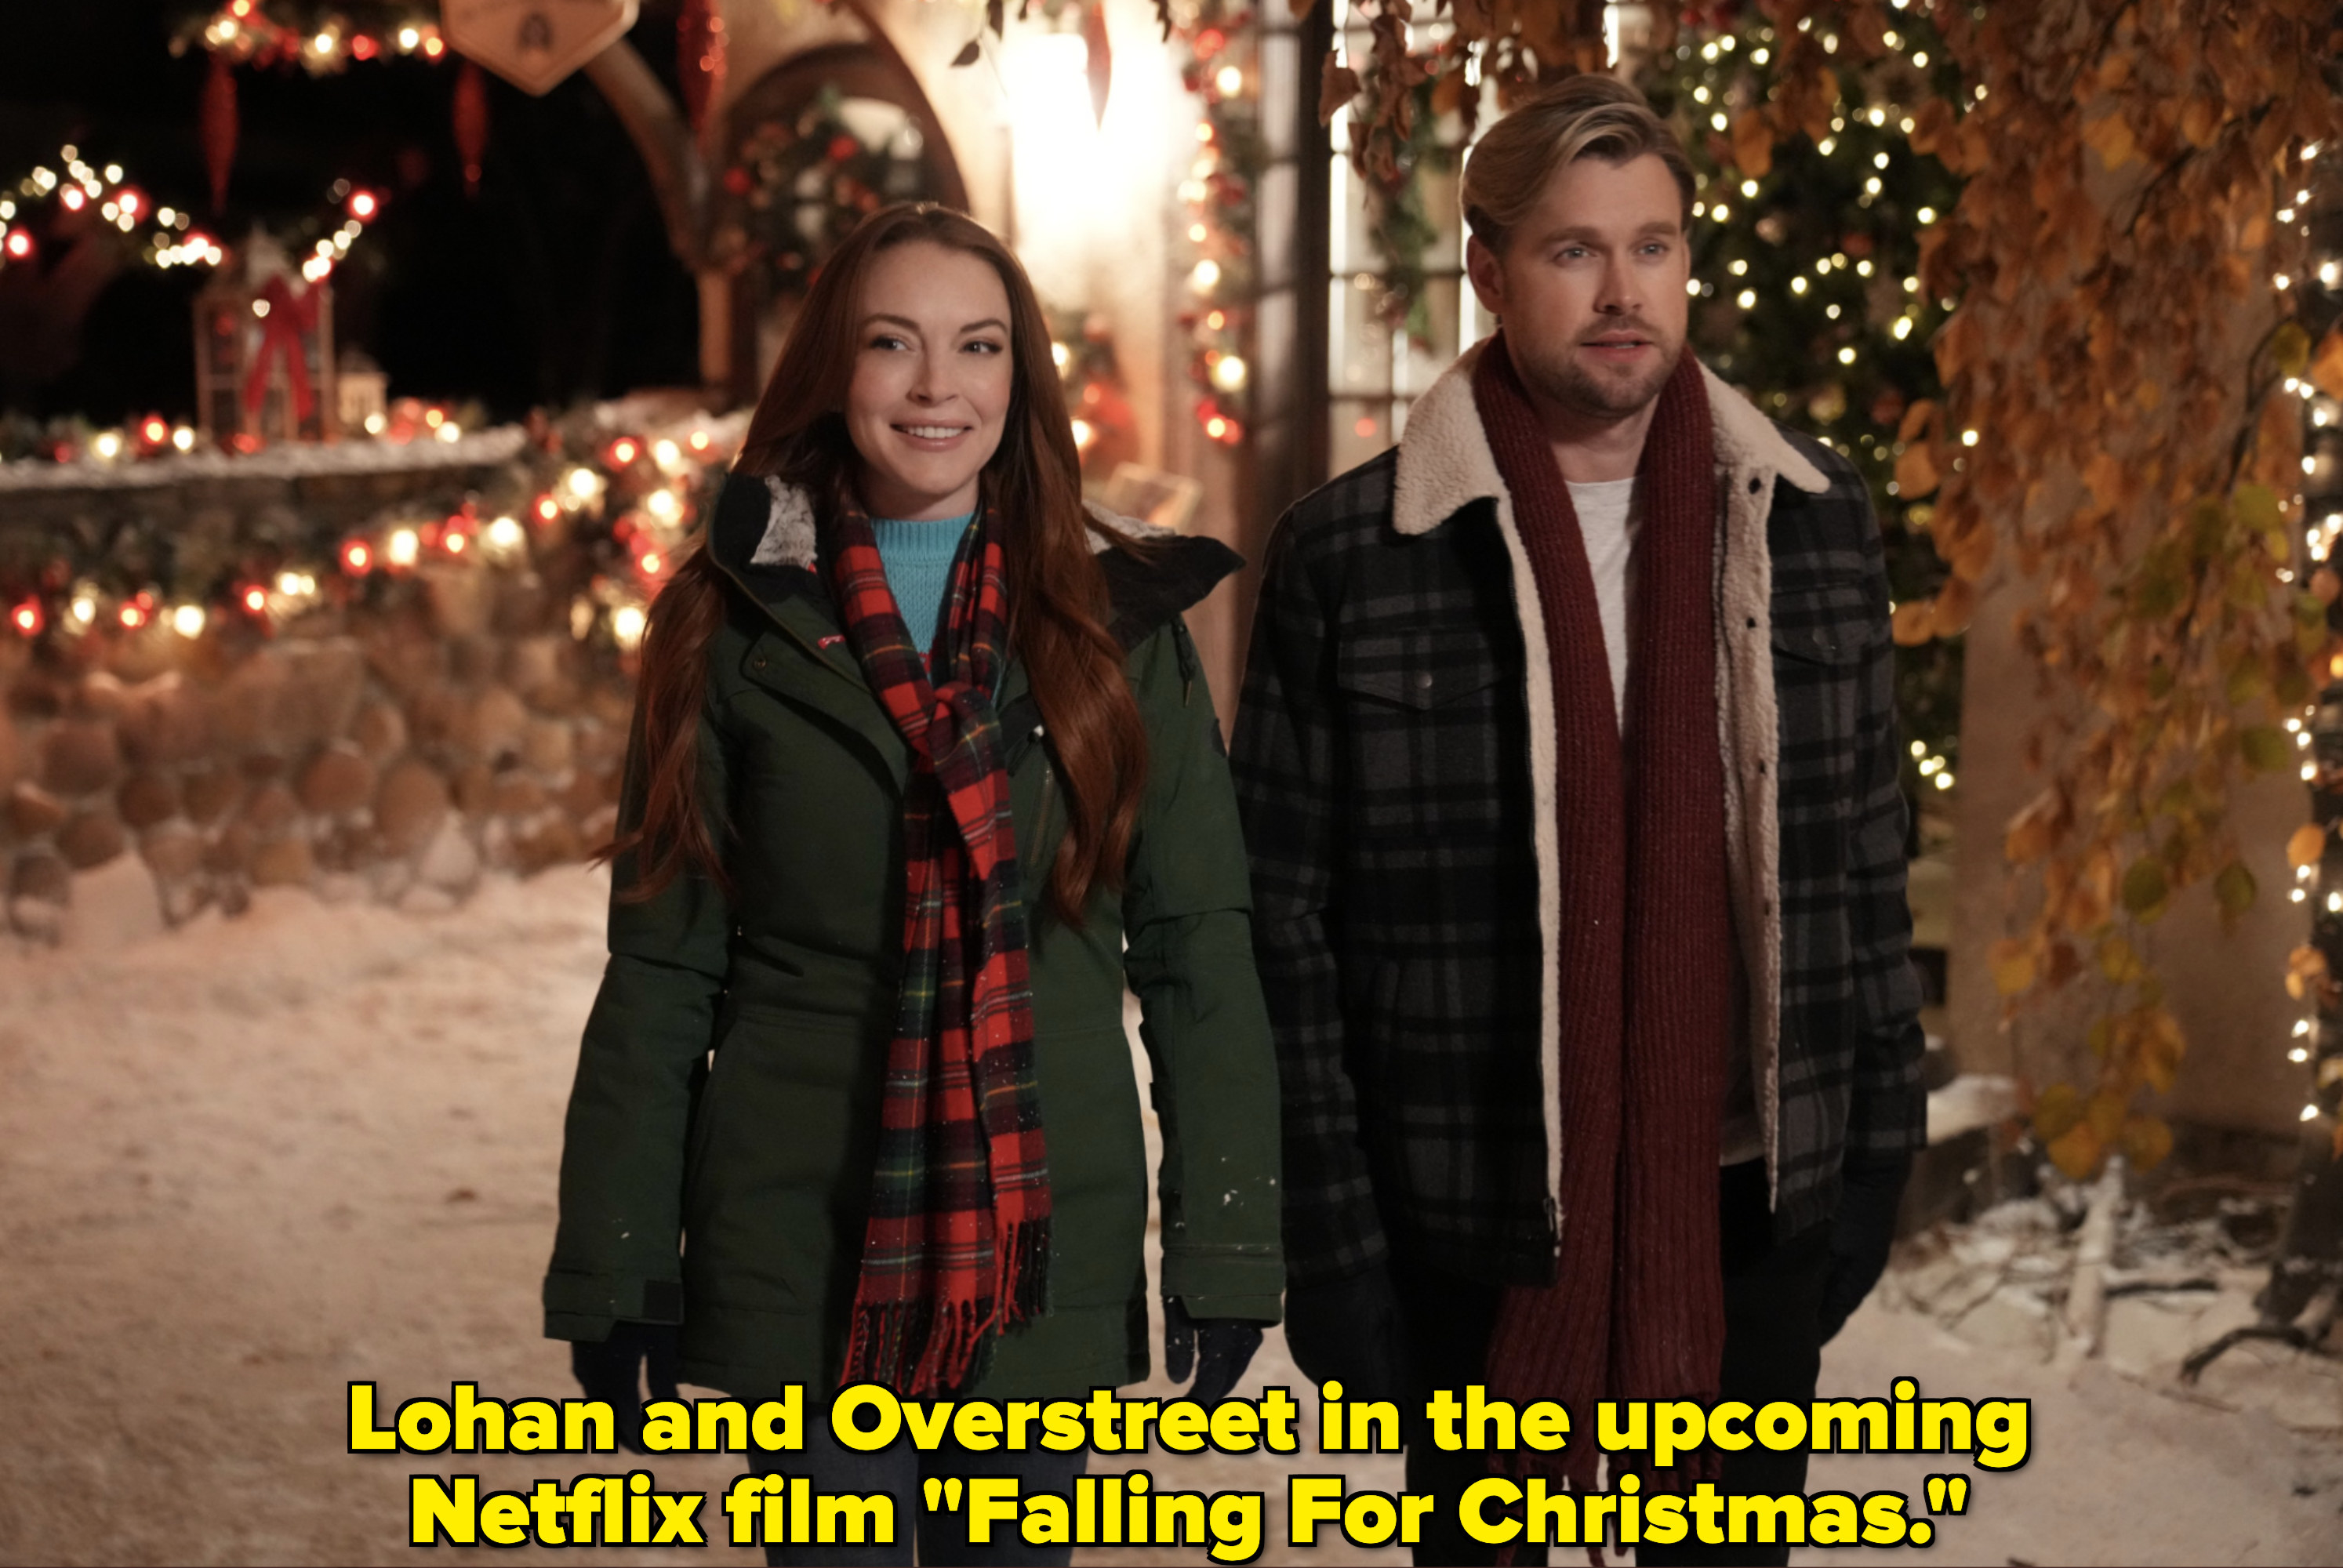 Lohan and Overstreet walking in snow together